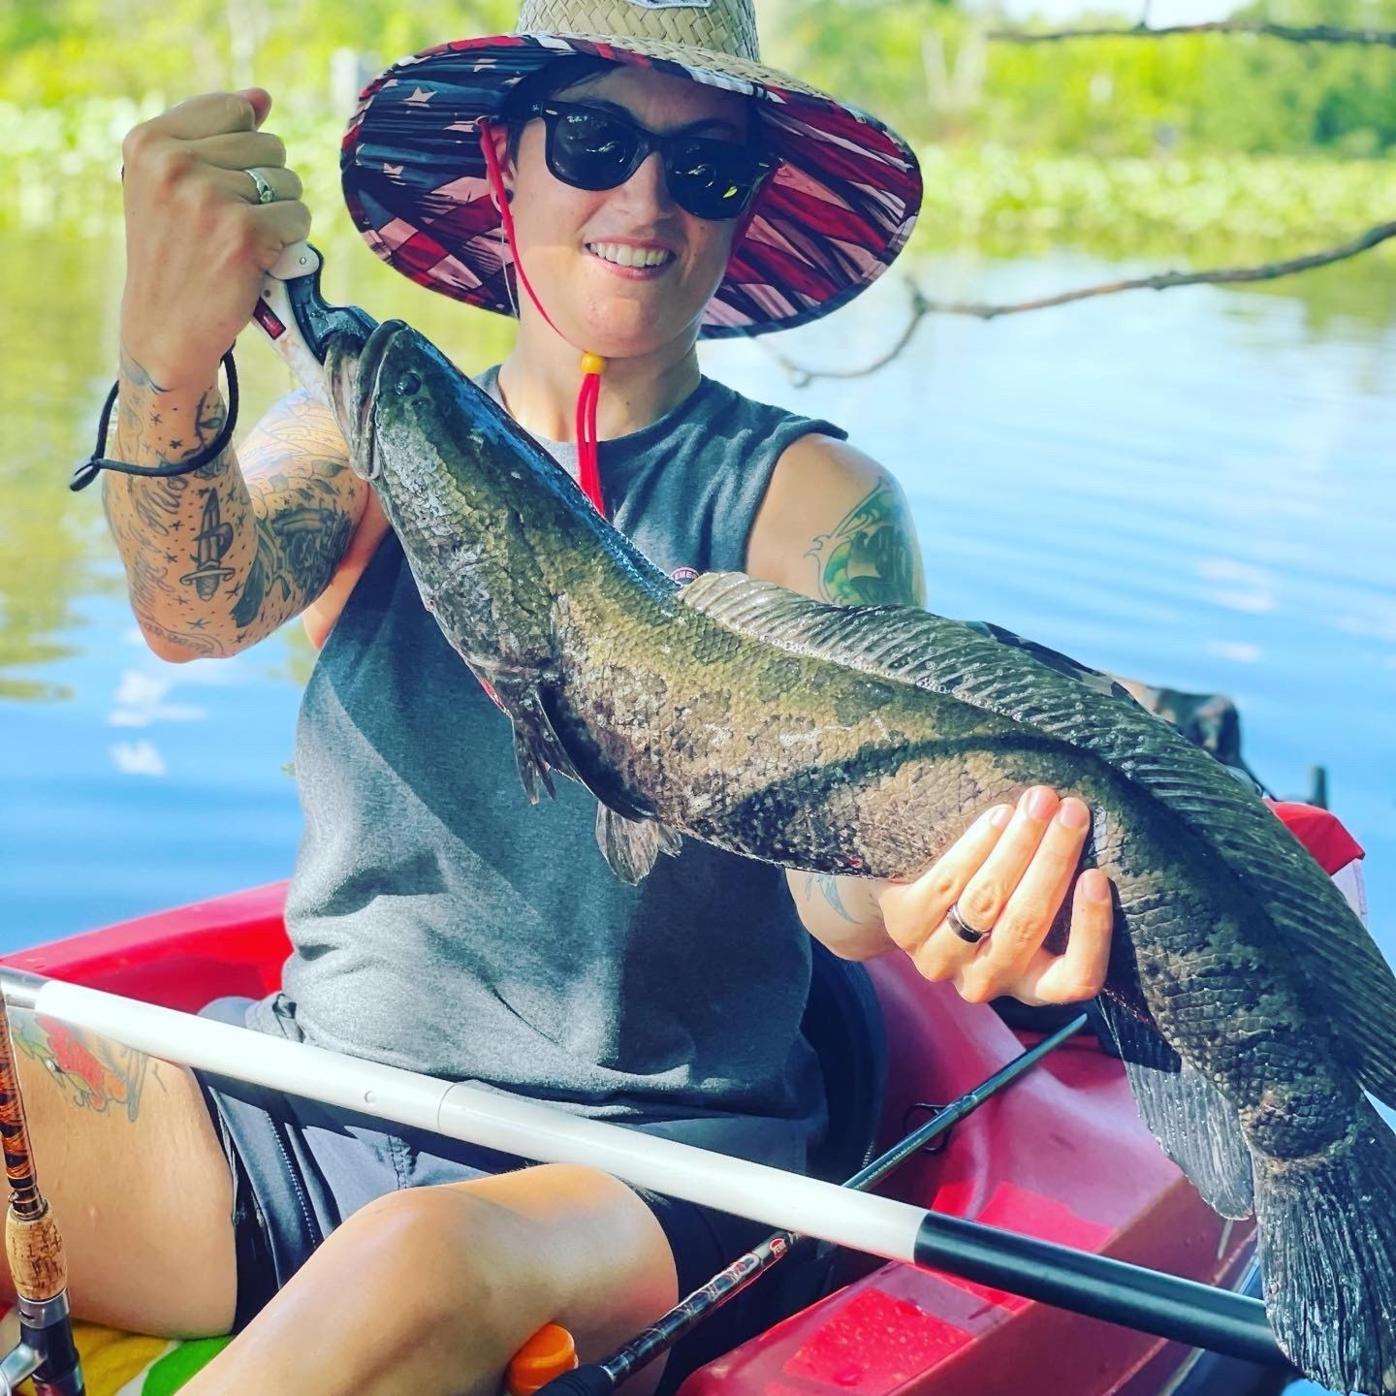 Snakeheads thriving on Eastern Shore, endangering local ecosystems, Environment